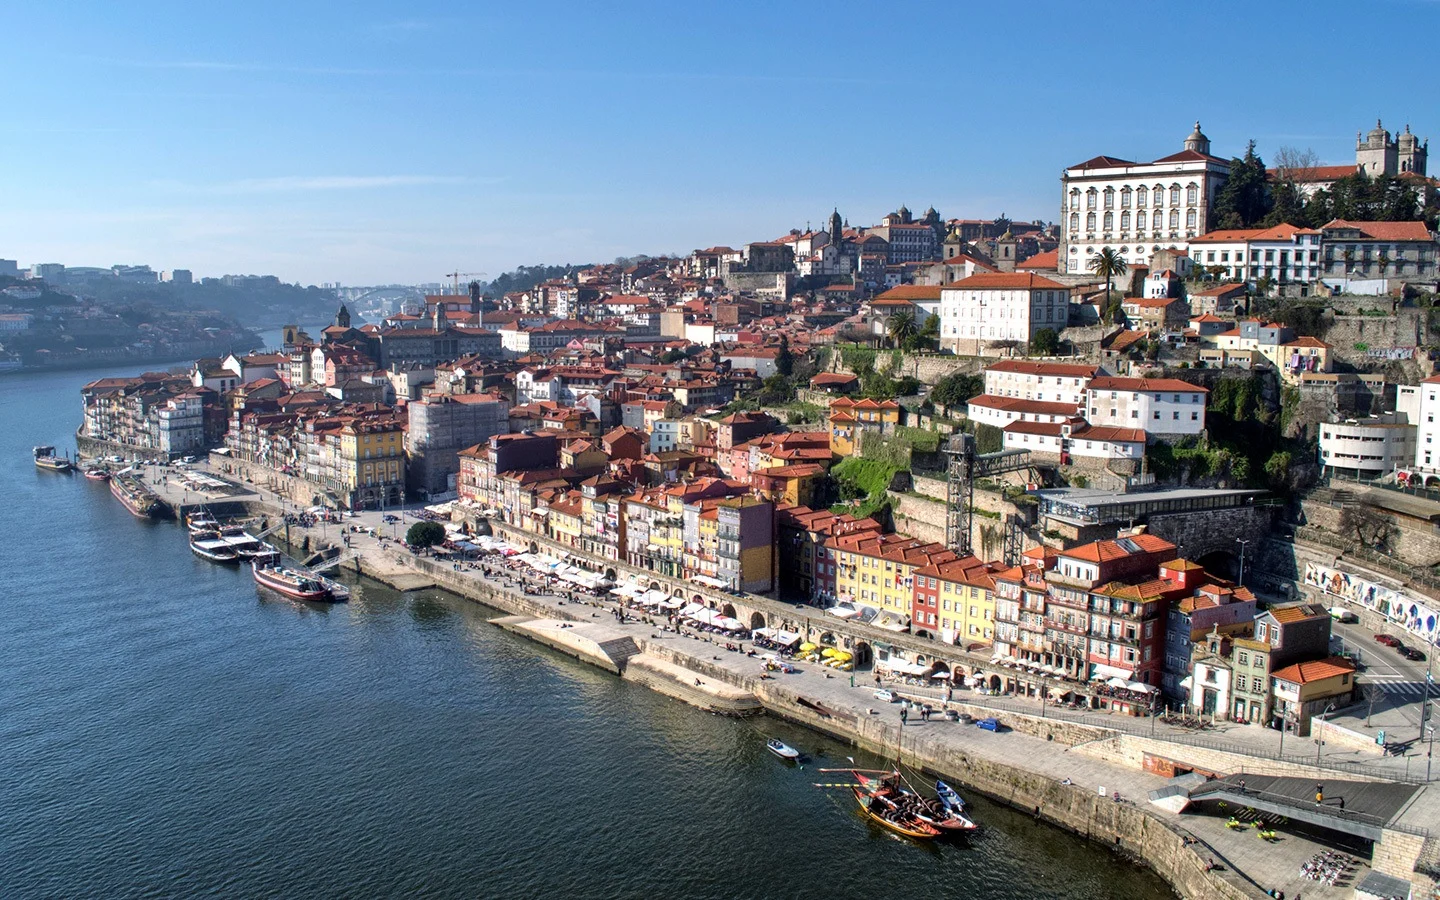 Getting lost in Porto’s old town